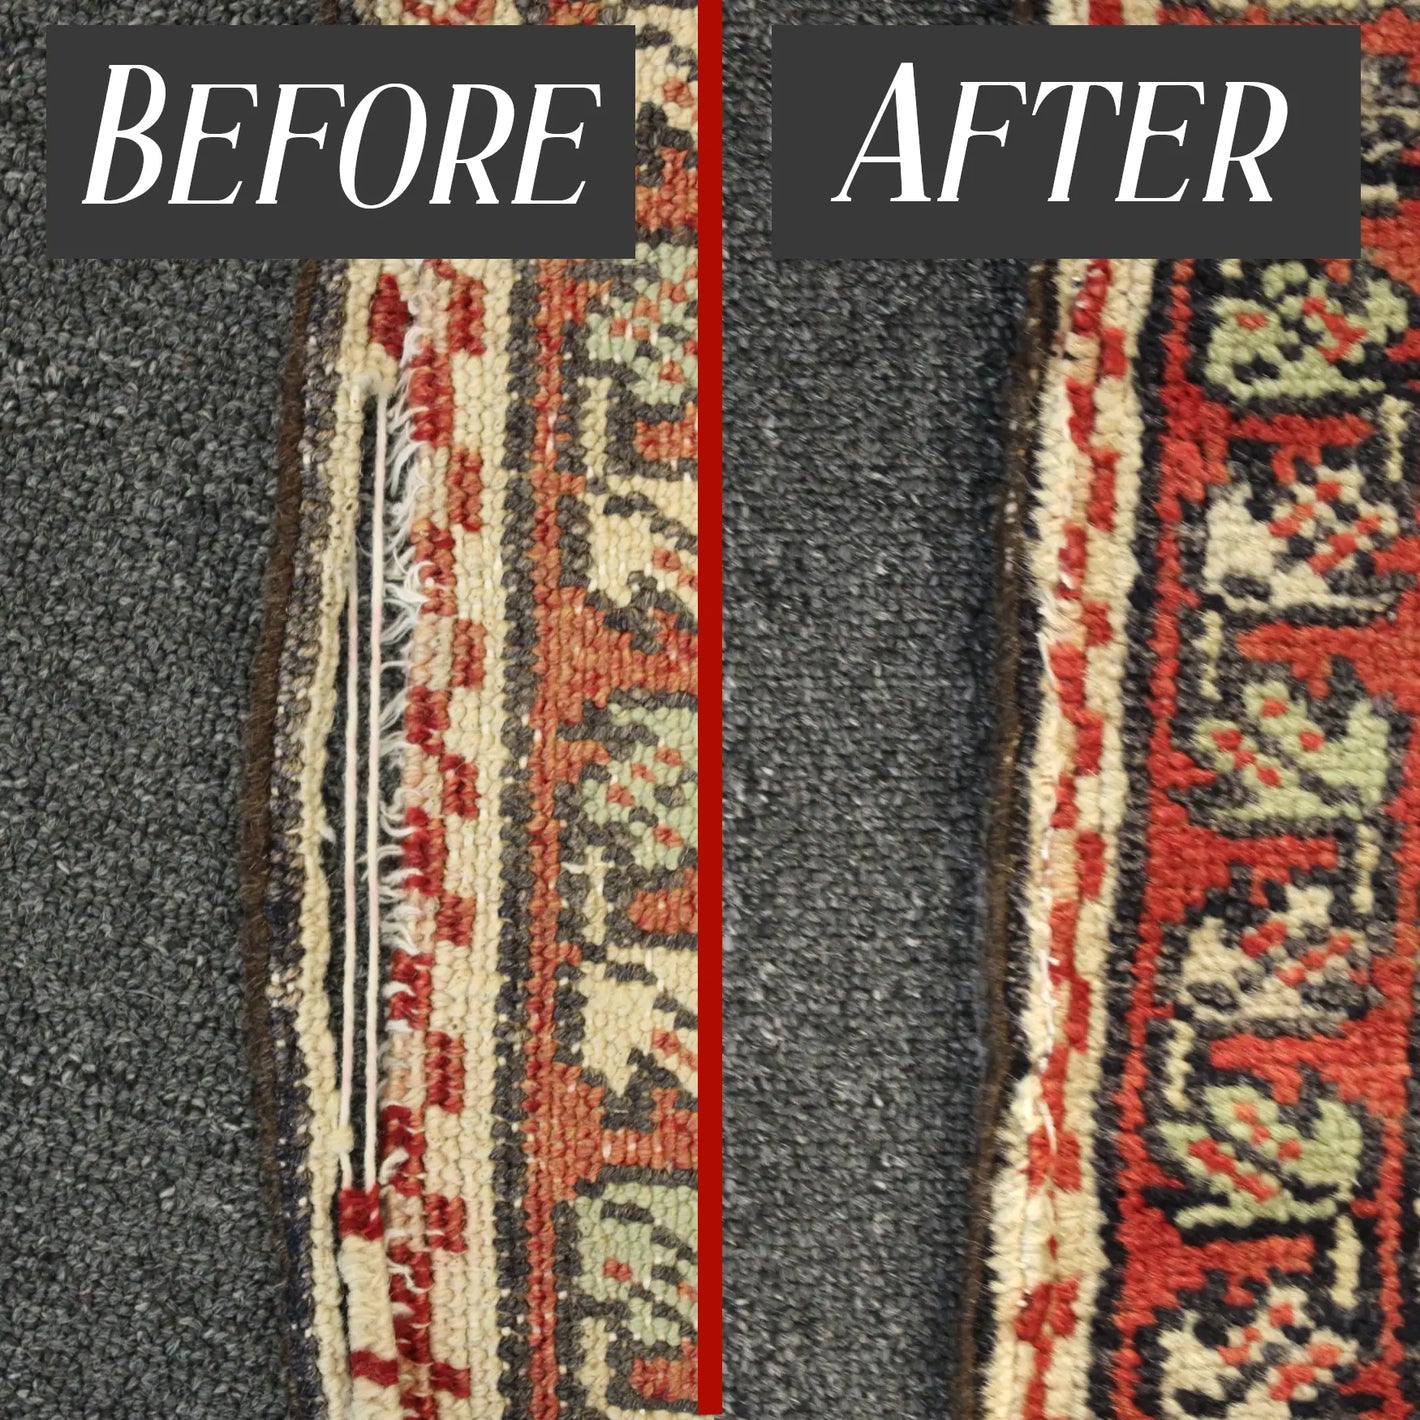 Before and after pictures of a rug edge repair